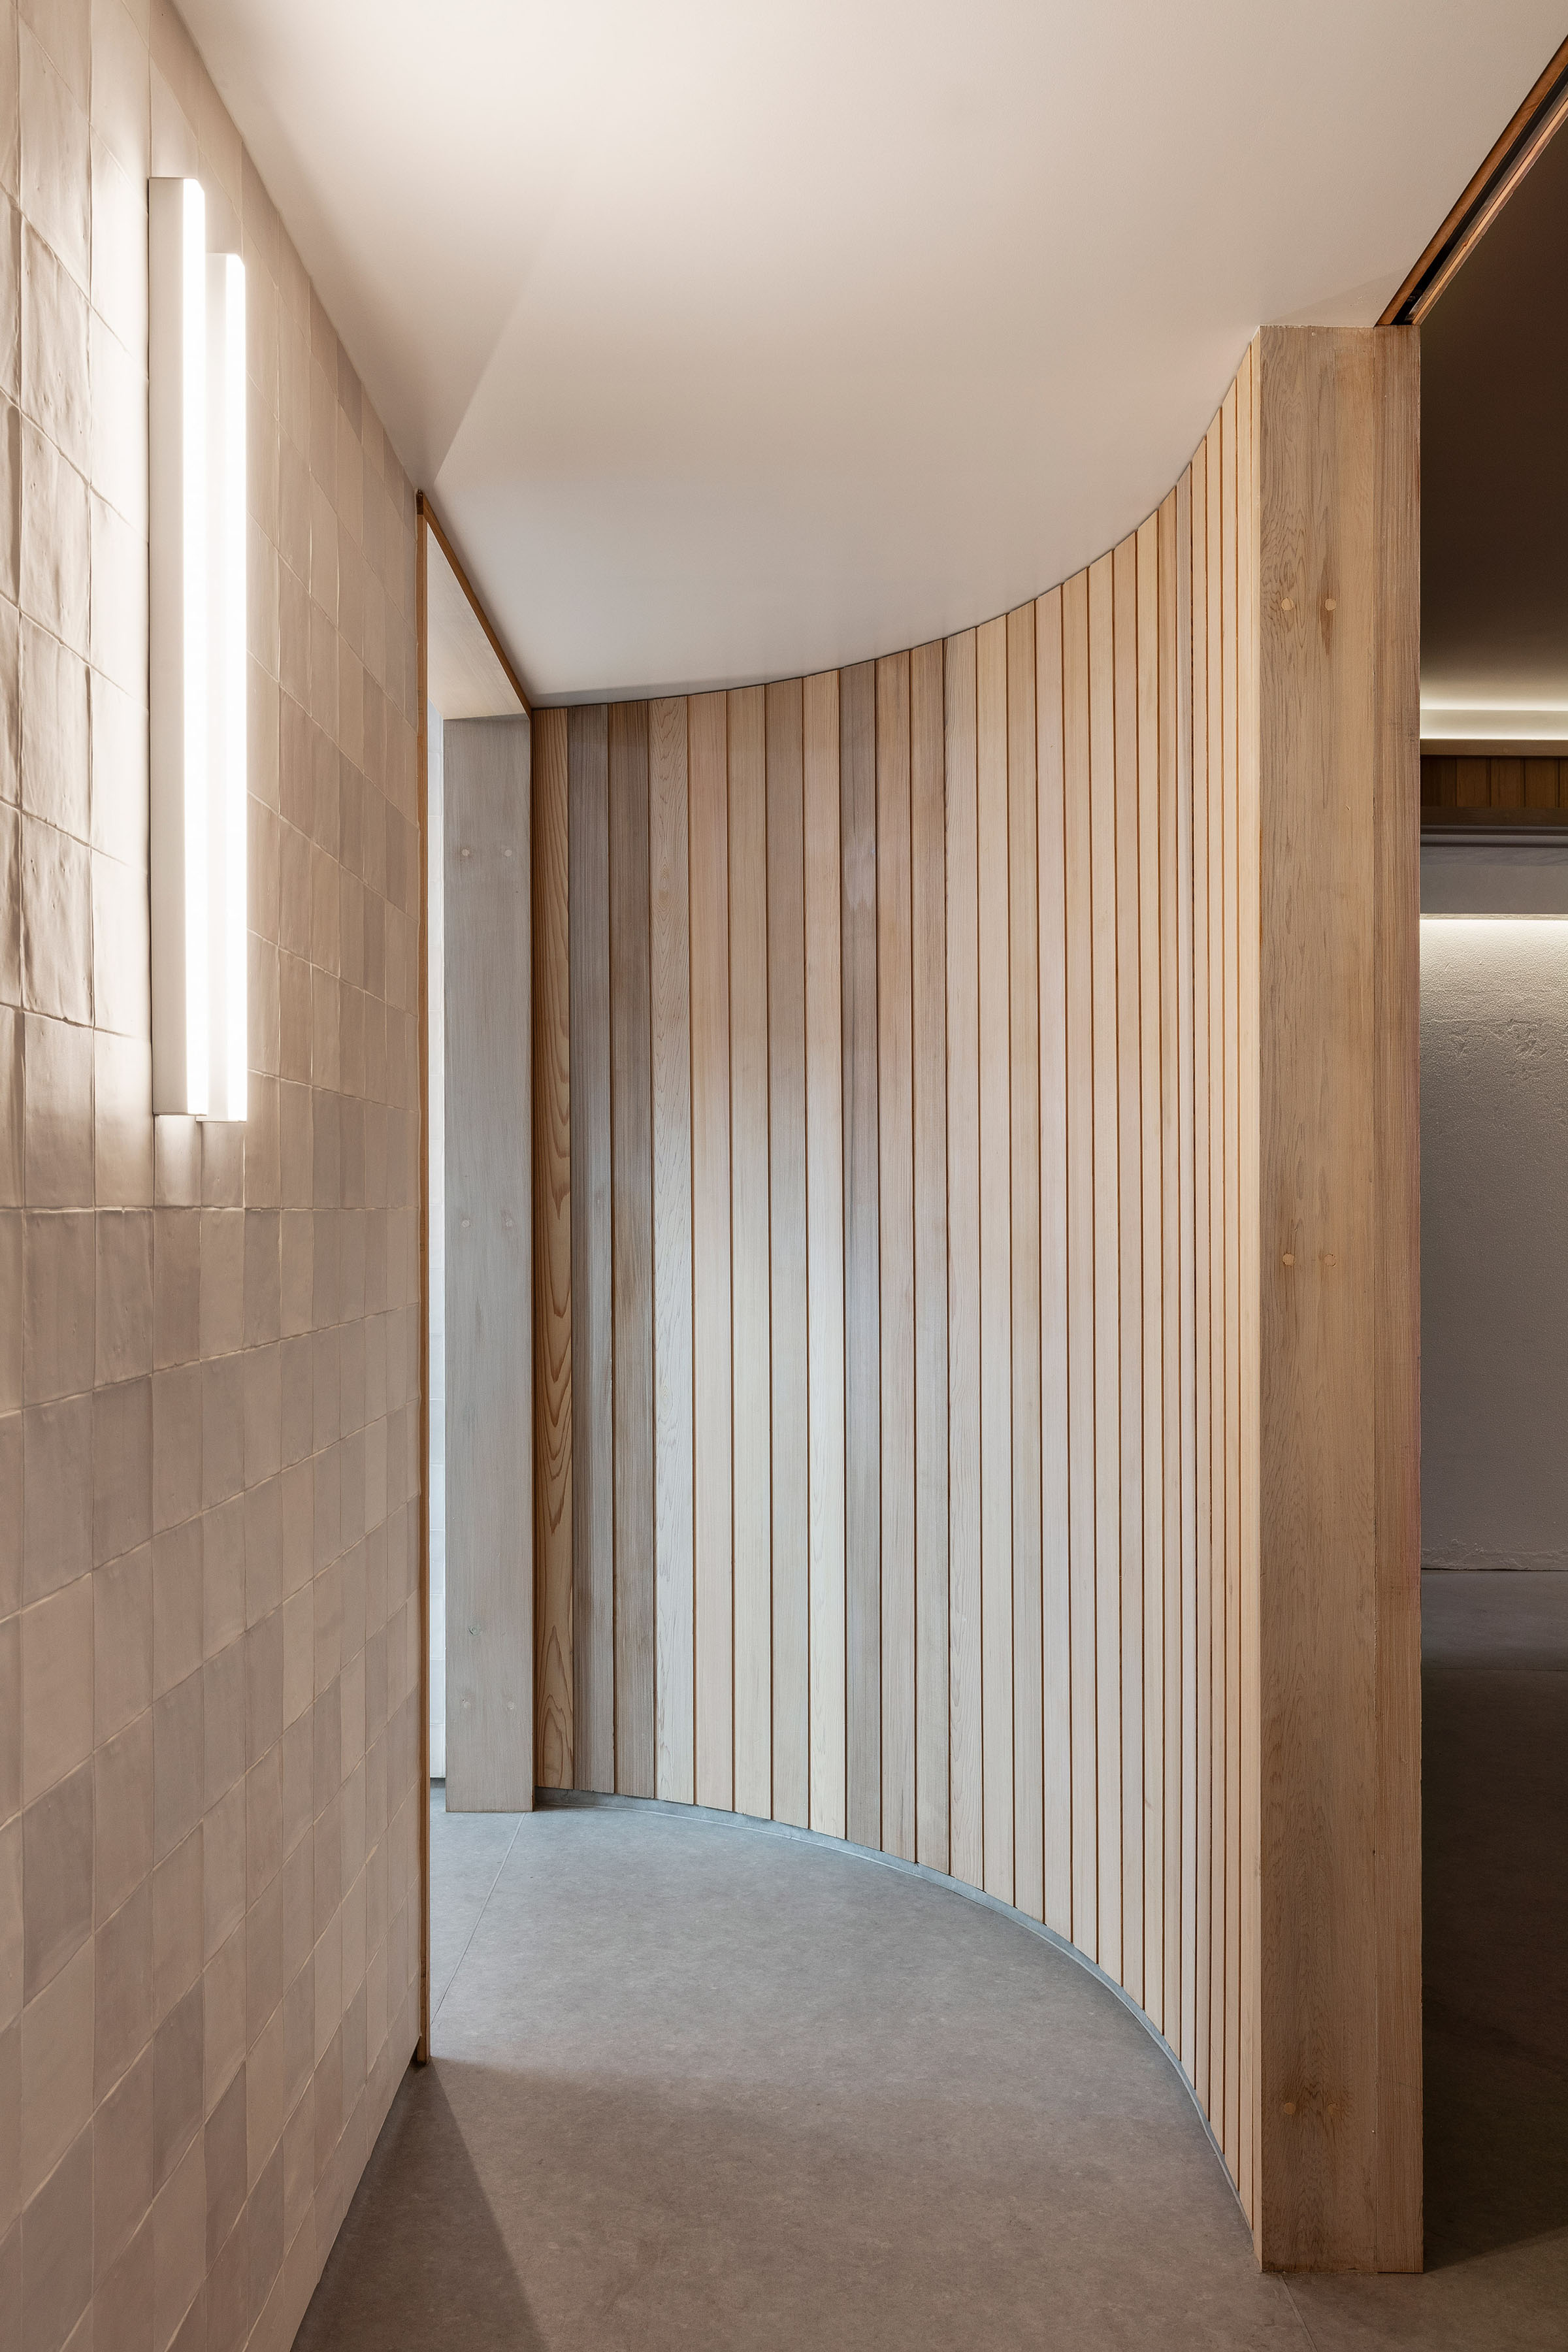 SHELTER wellness centre in Sydney | Gym and spa design | Softer Volumes